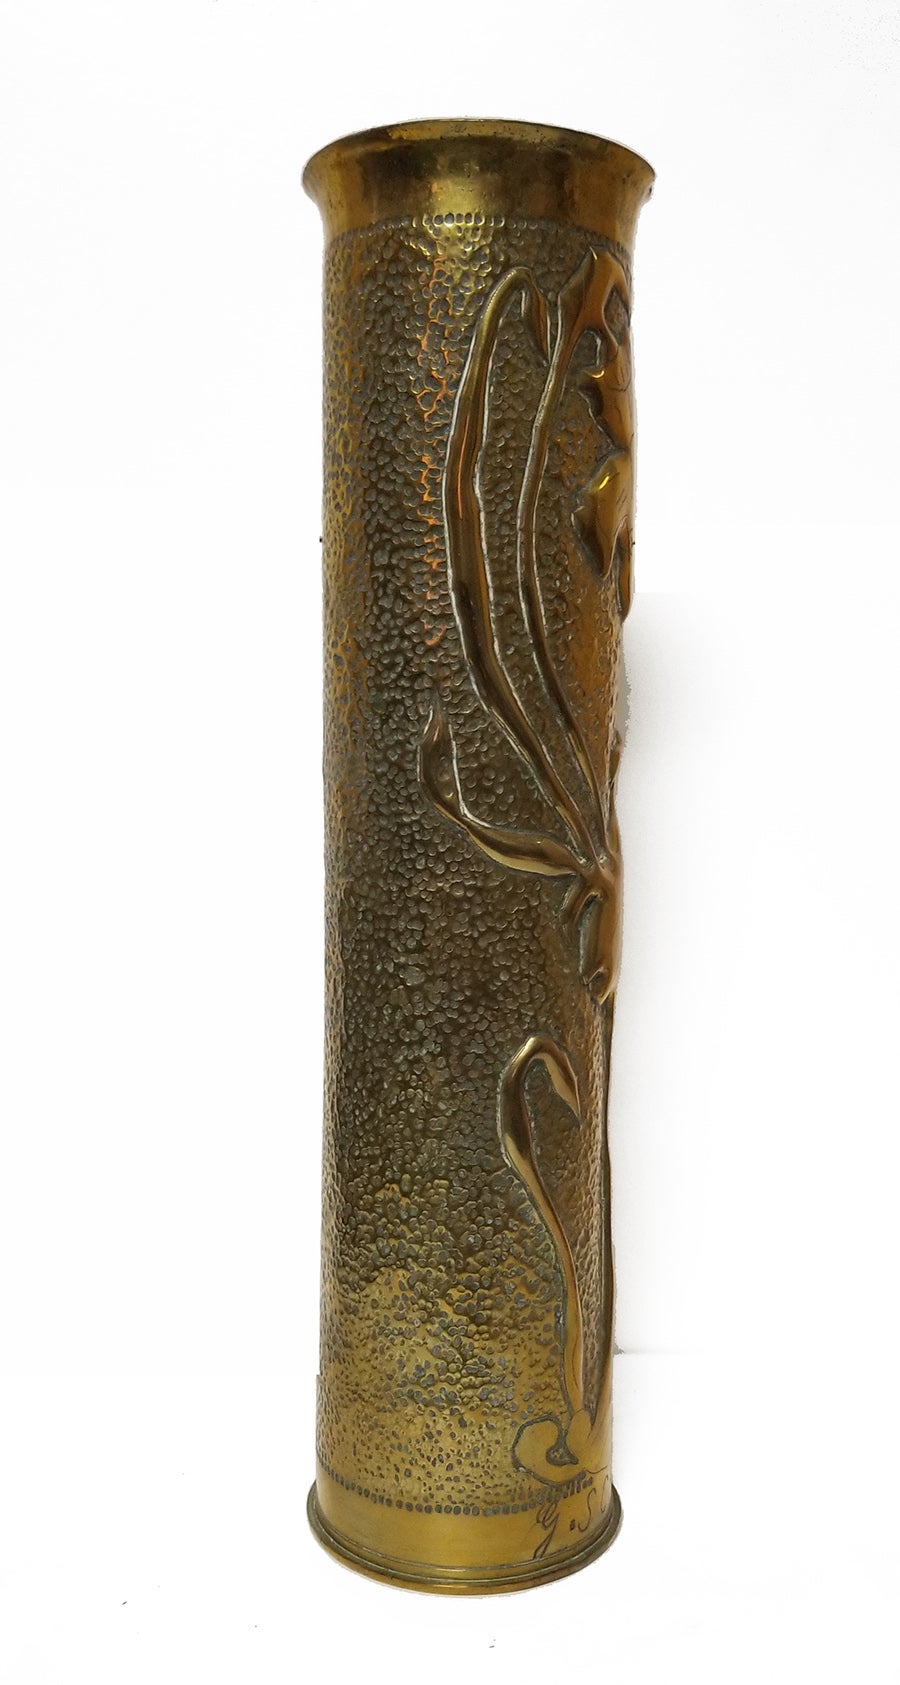 Decorative French Artillery 75mm Shell Case with Raised Floral Motif